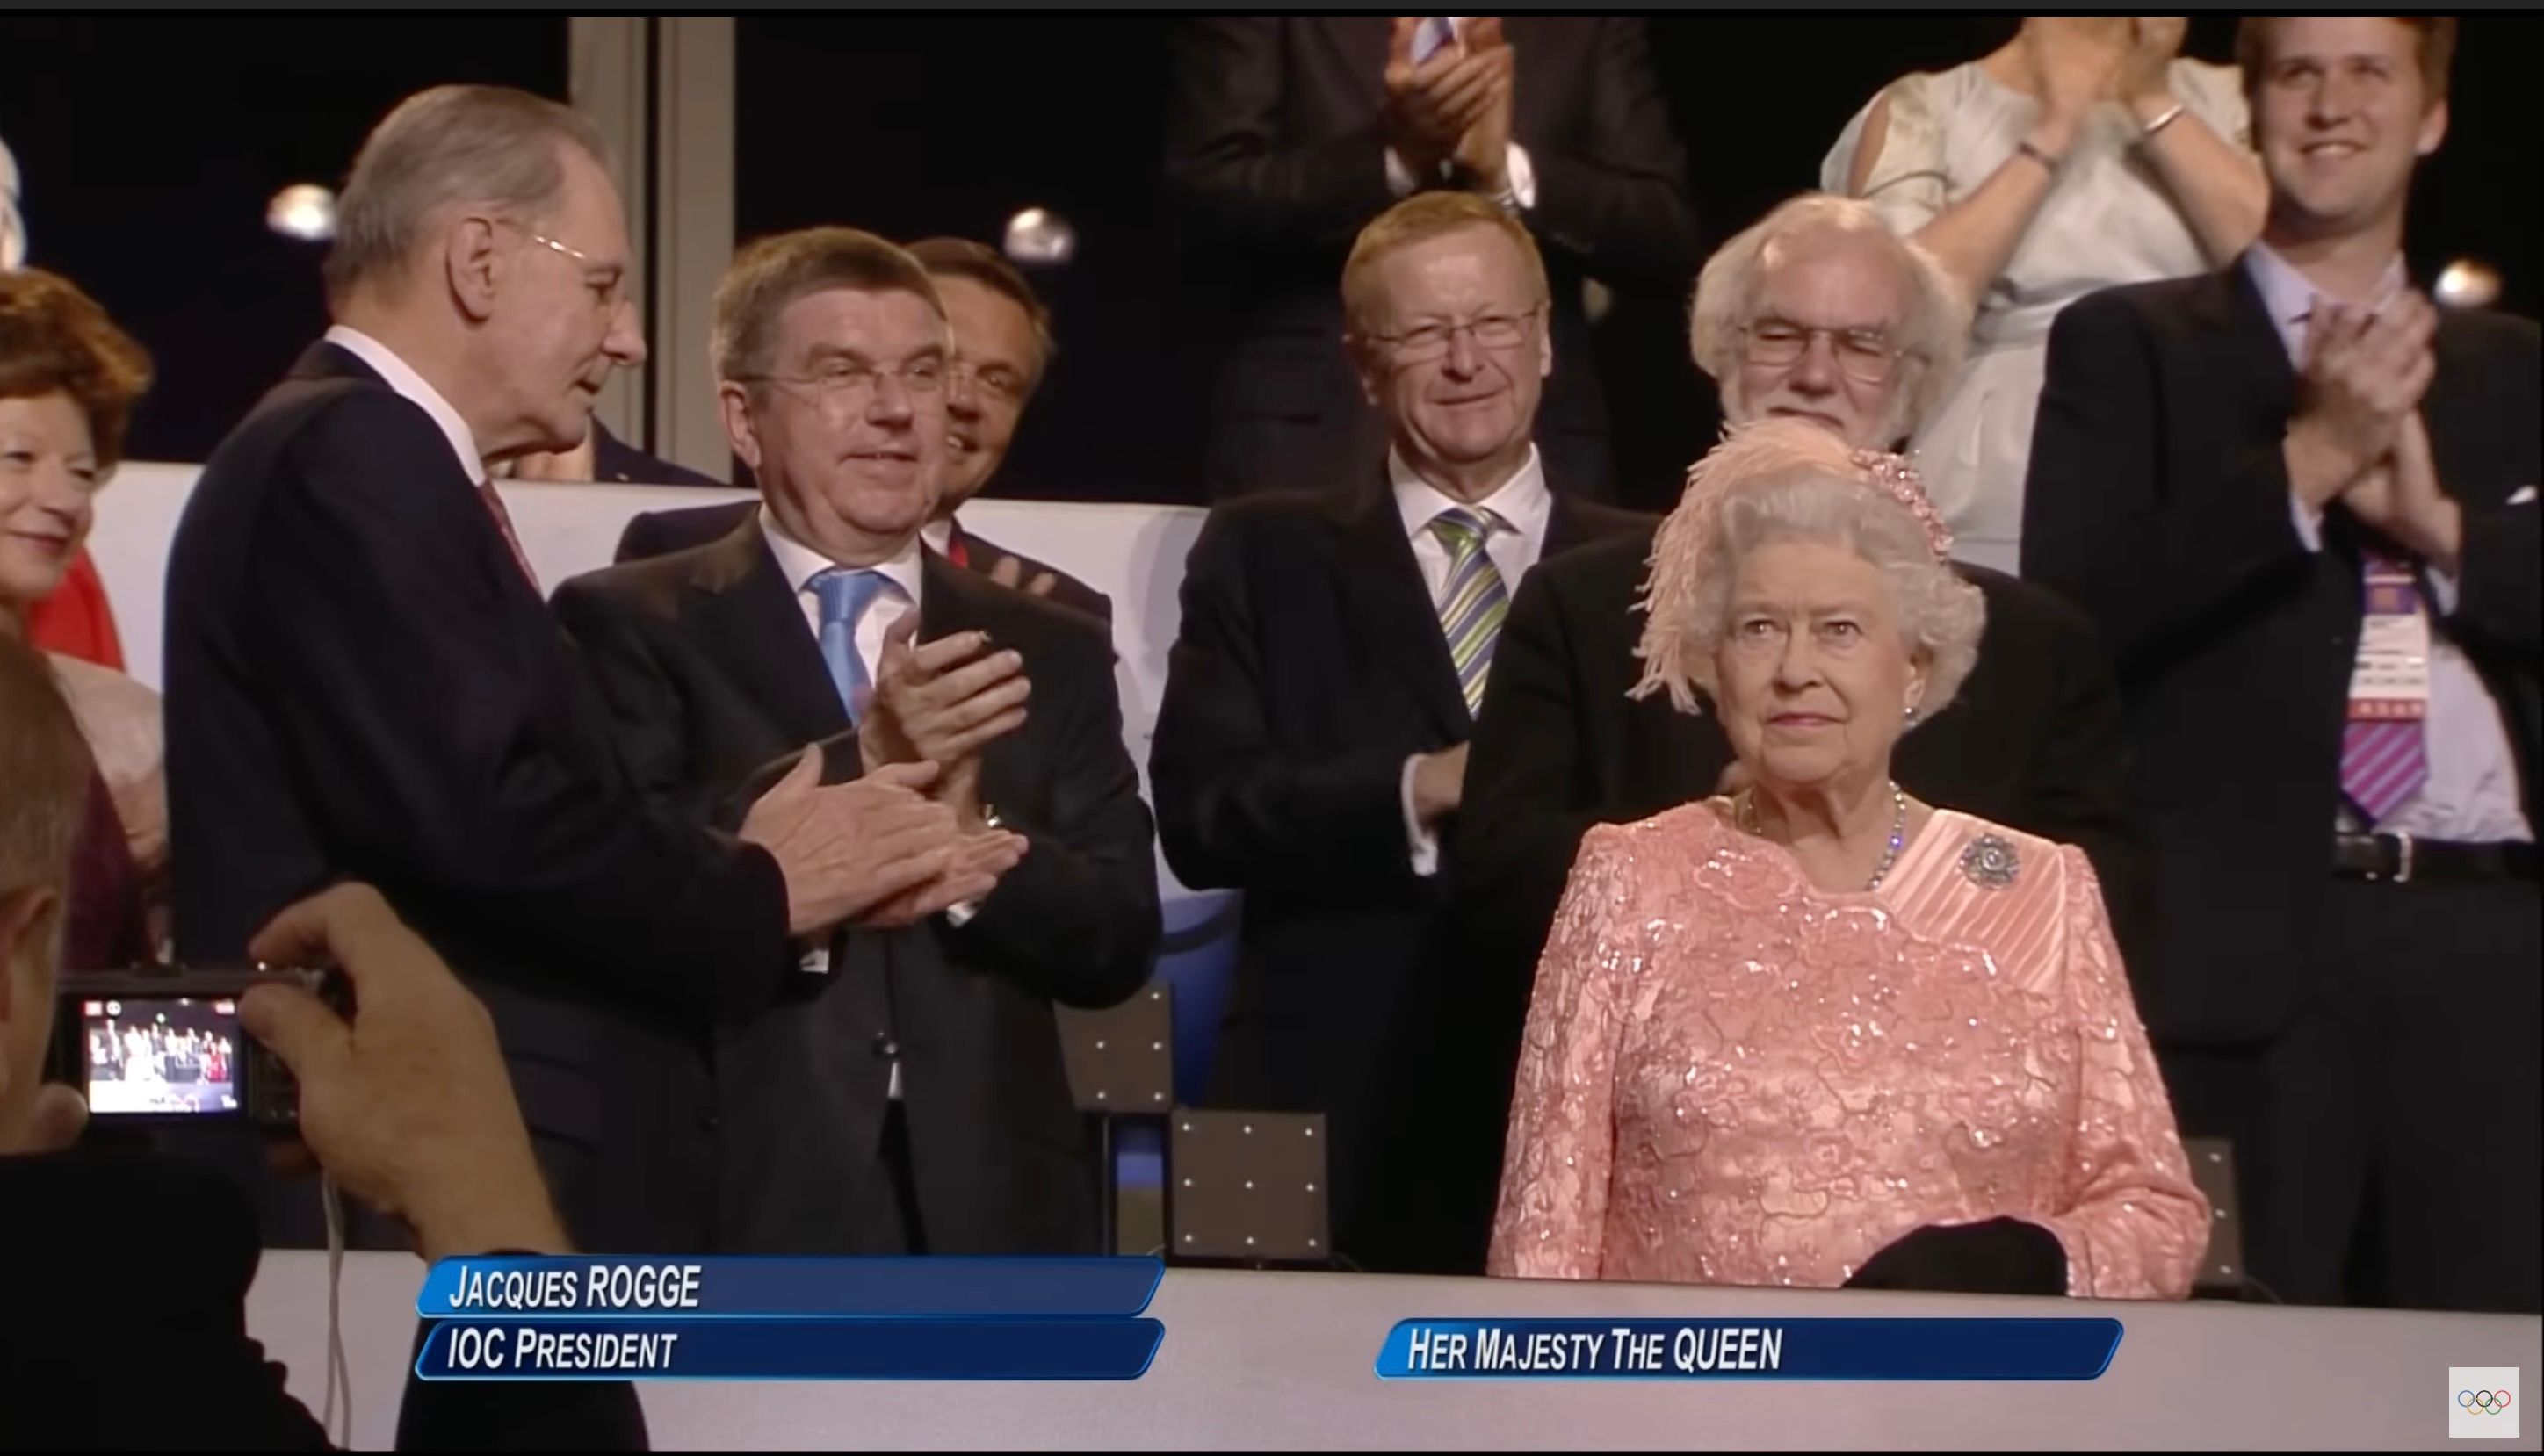 Queen and James Bond, London 2012